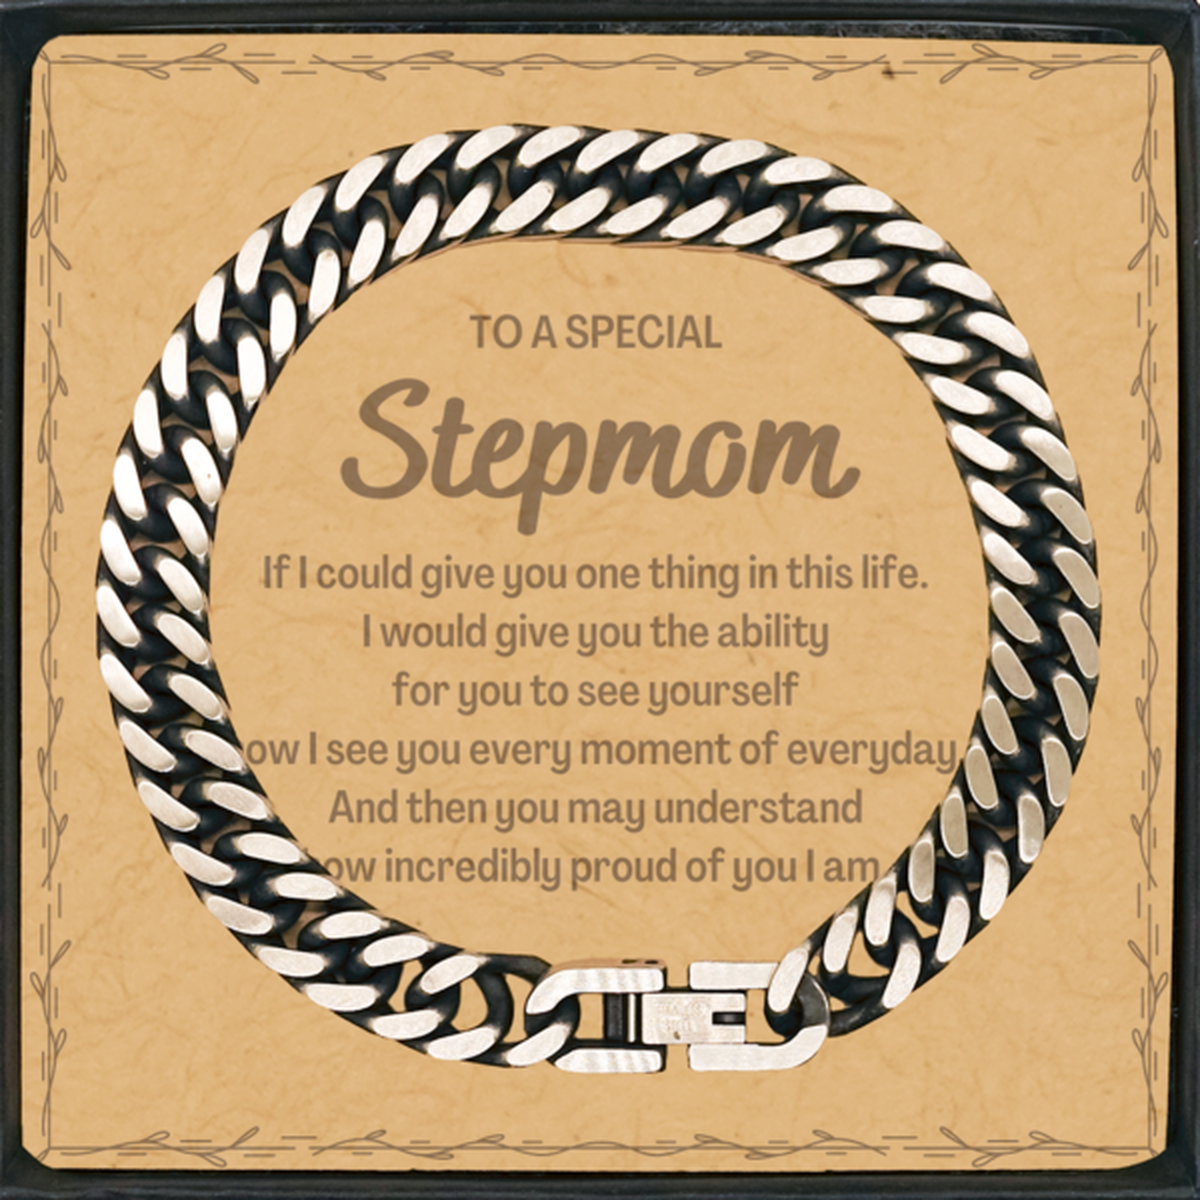 To My Stepmom Cuban Link Chain Bracelet, Gifts For Stepmom Message Card, Inspirational Gifts for Christmas Birthday, Epic Gifts for Stepmom To A Special Stepmom how incredibly proud of you I am